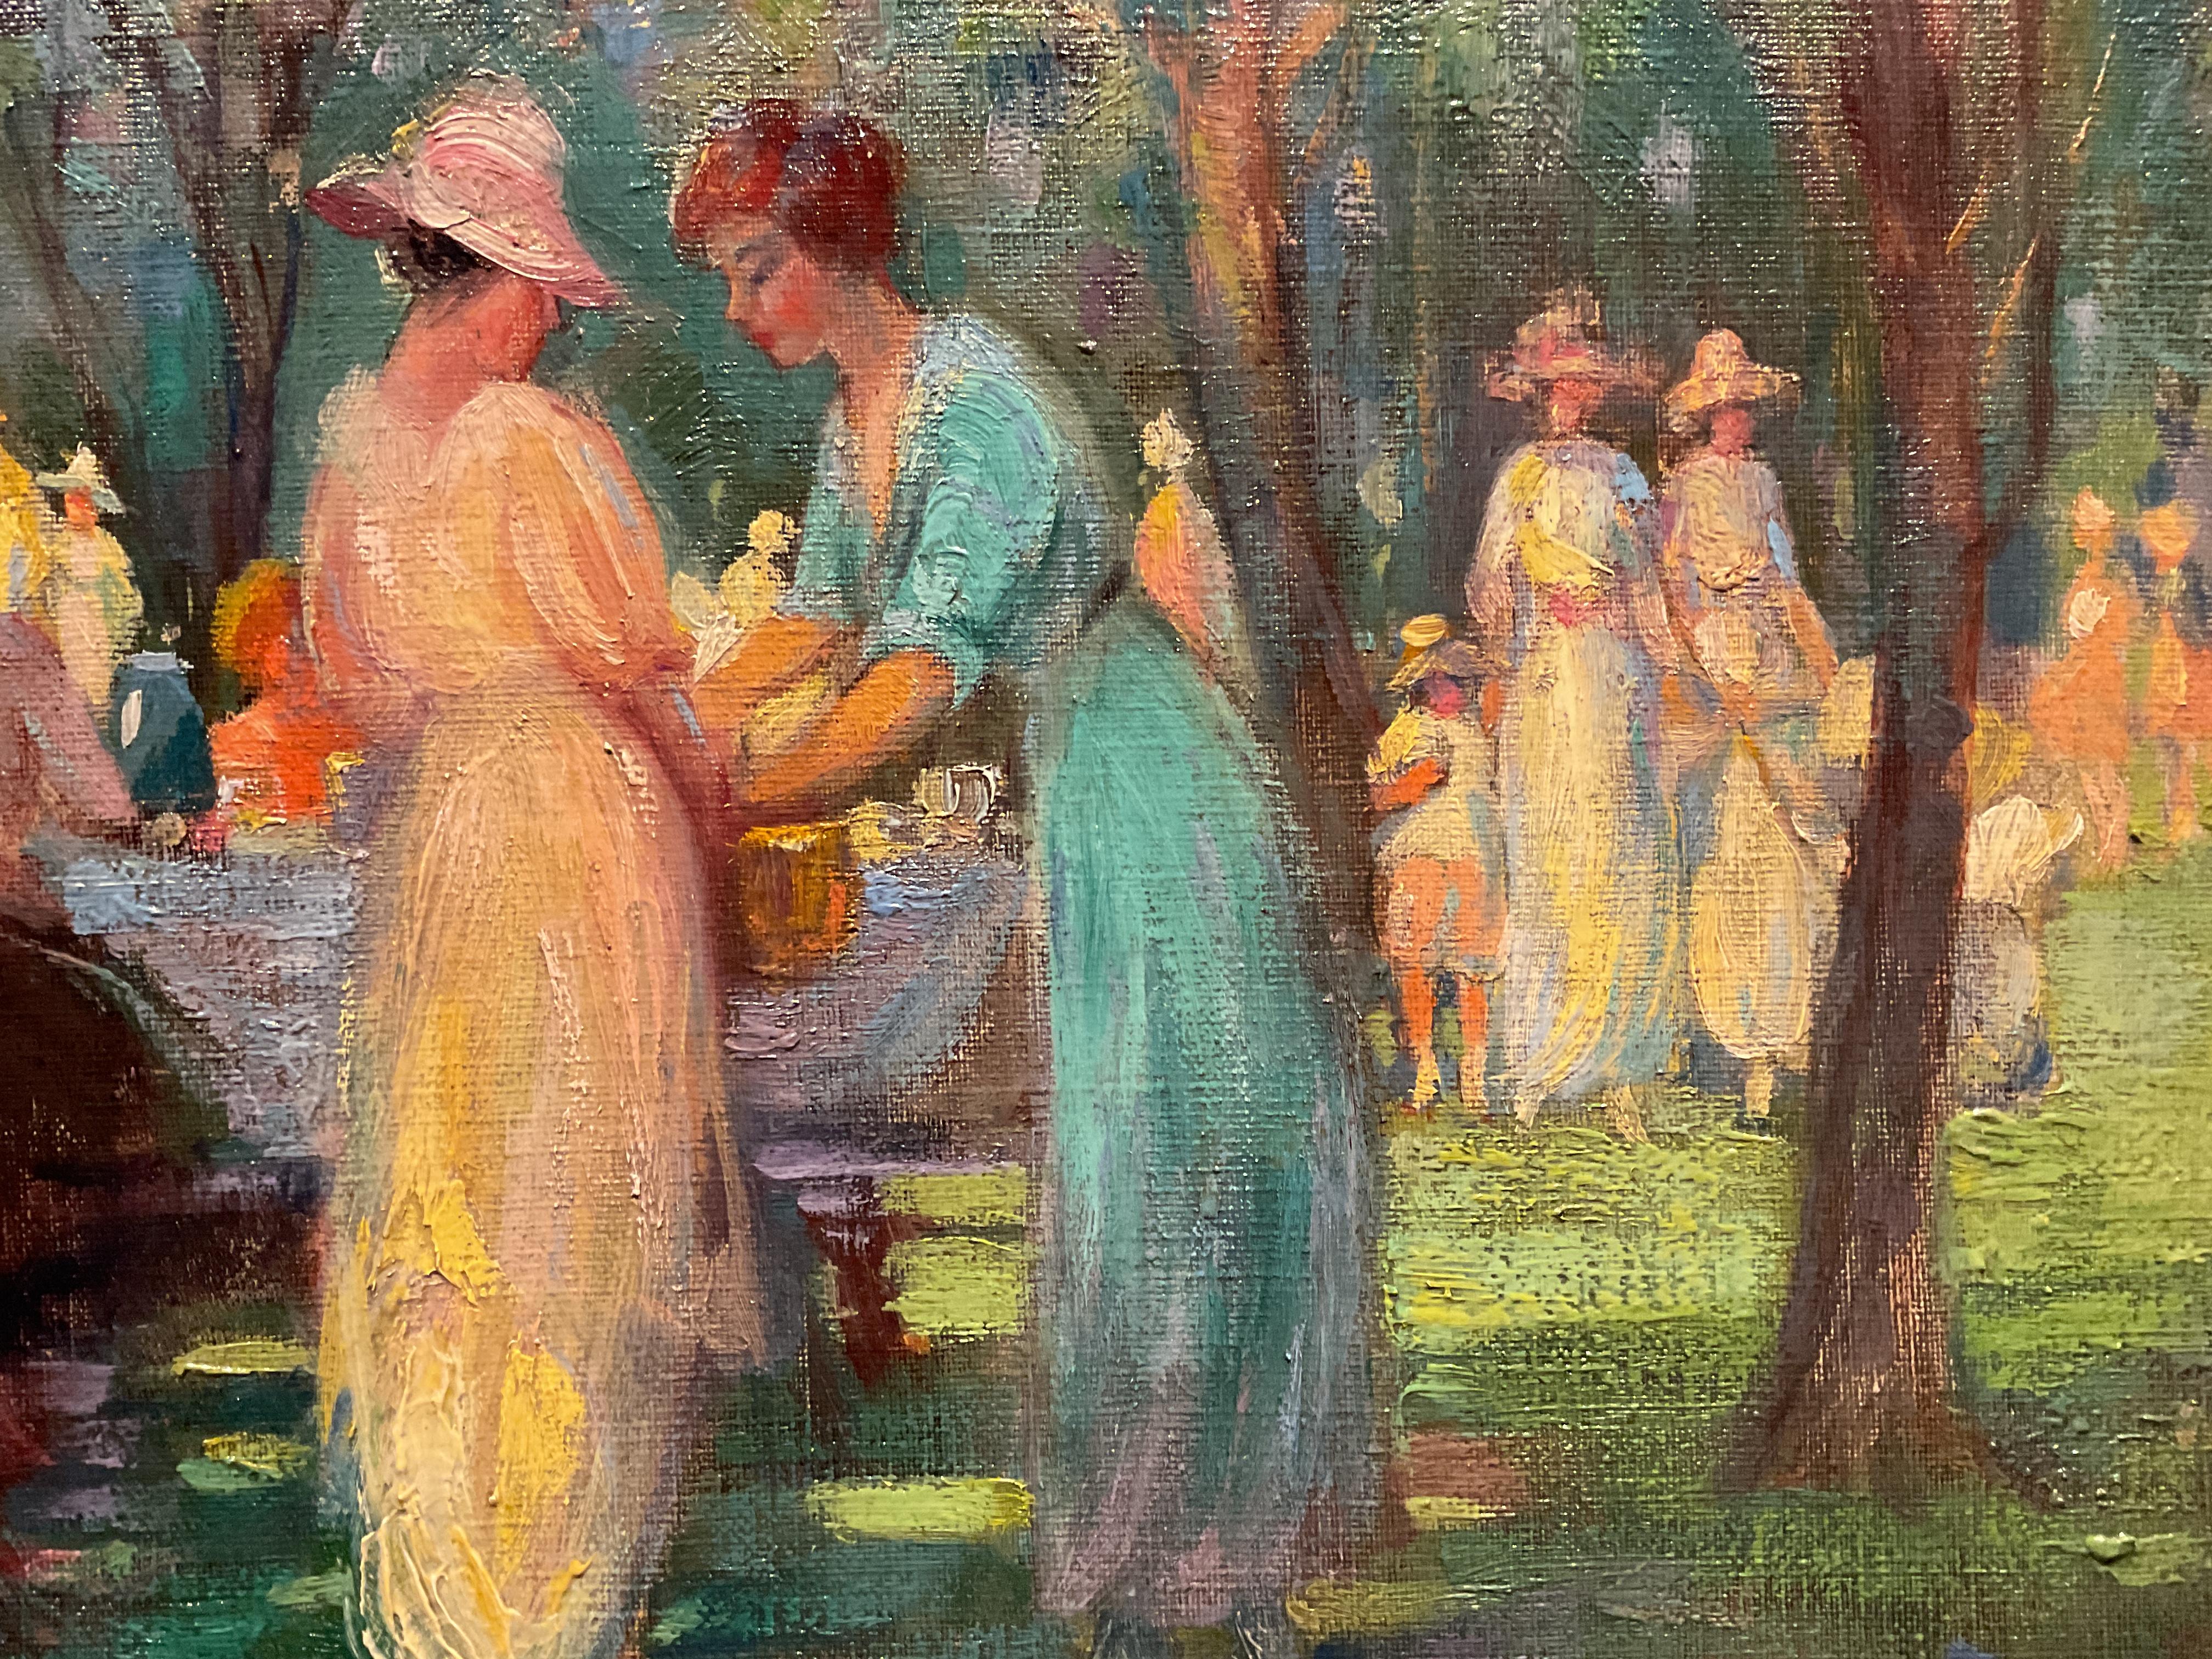 Fine Impressionist American School Oil on Canvas; Family Picnic or Outing, 1925 - Brown Figurative Painting by Unknown